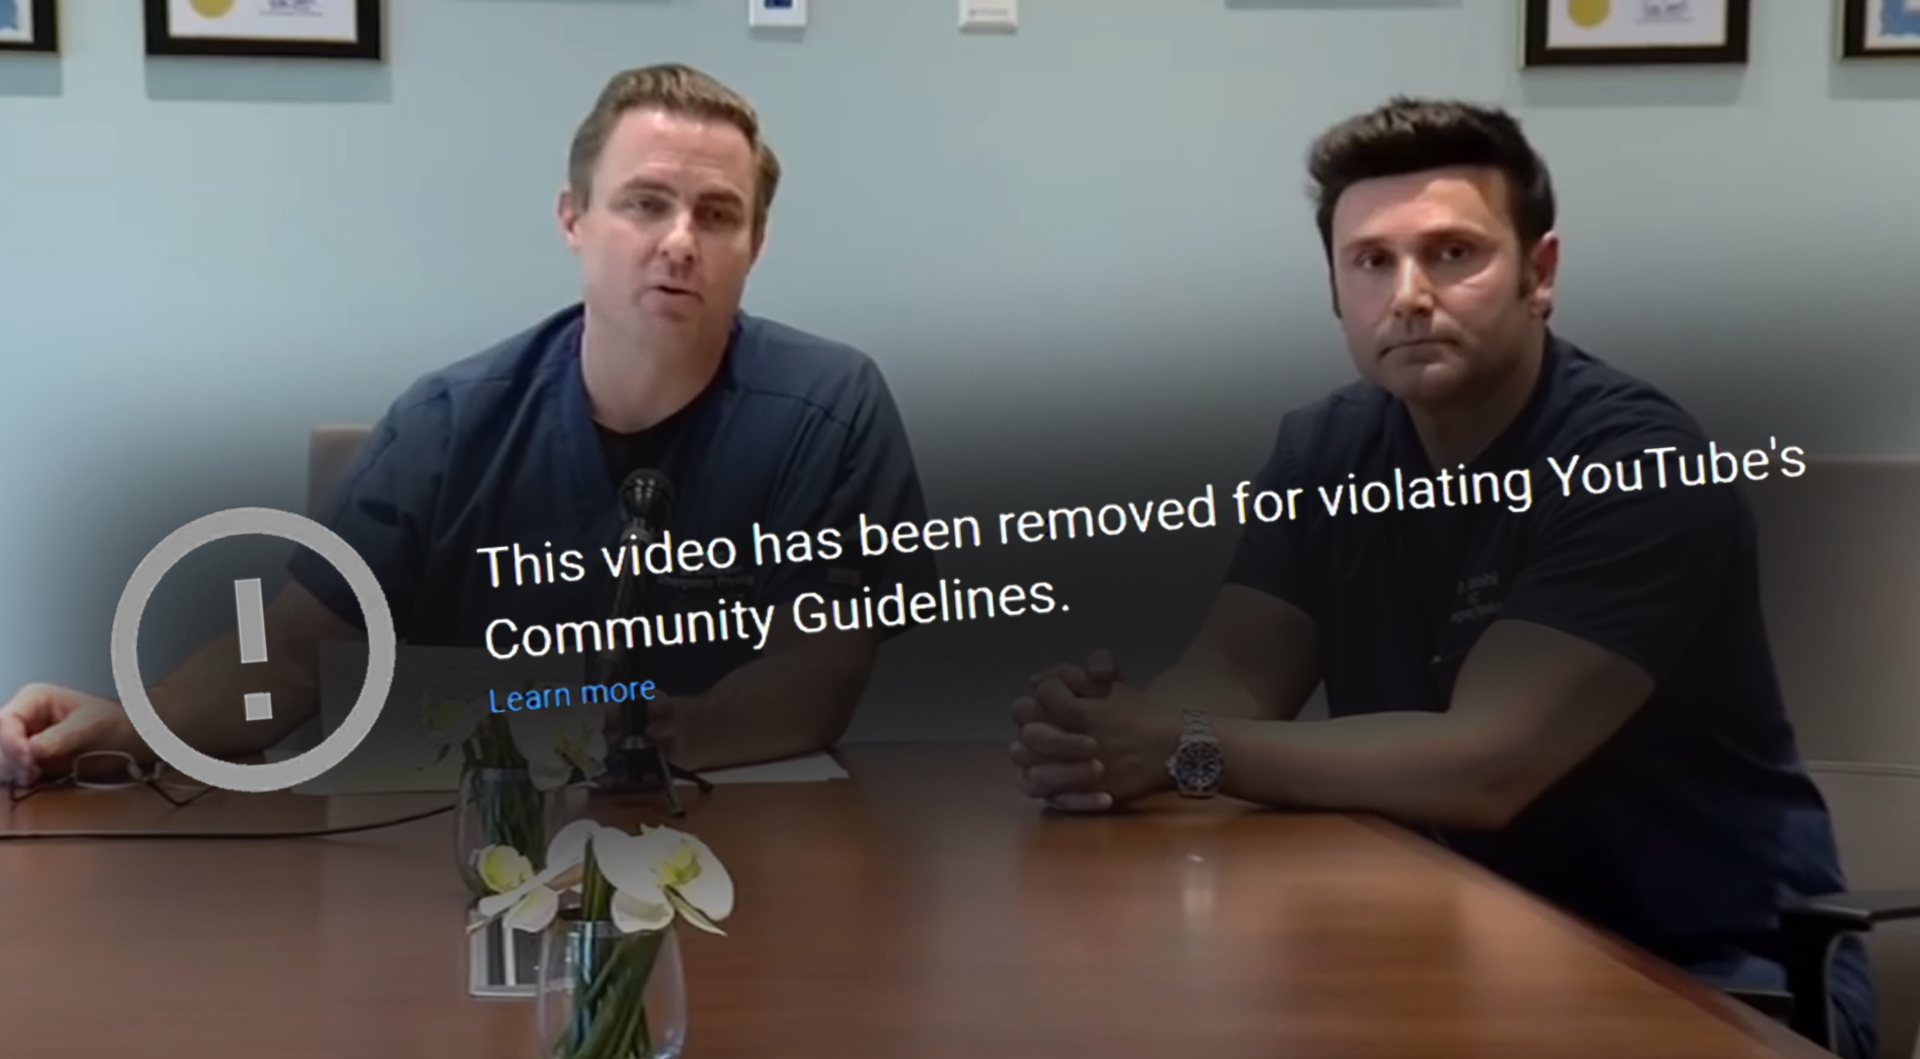 Bitscoins.net's Mining Video Censored: The Tale of Youtube's Blatant Censorship and Propaganda